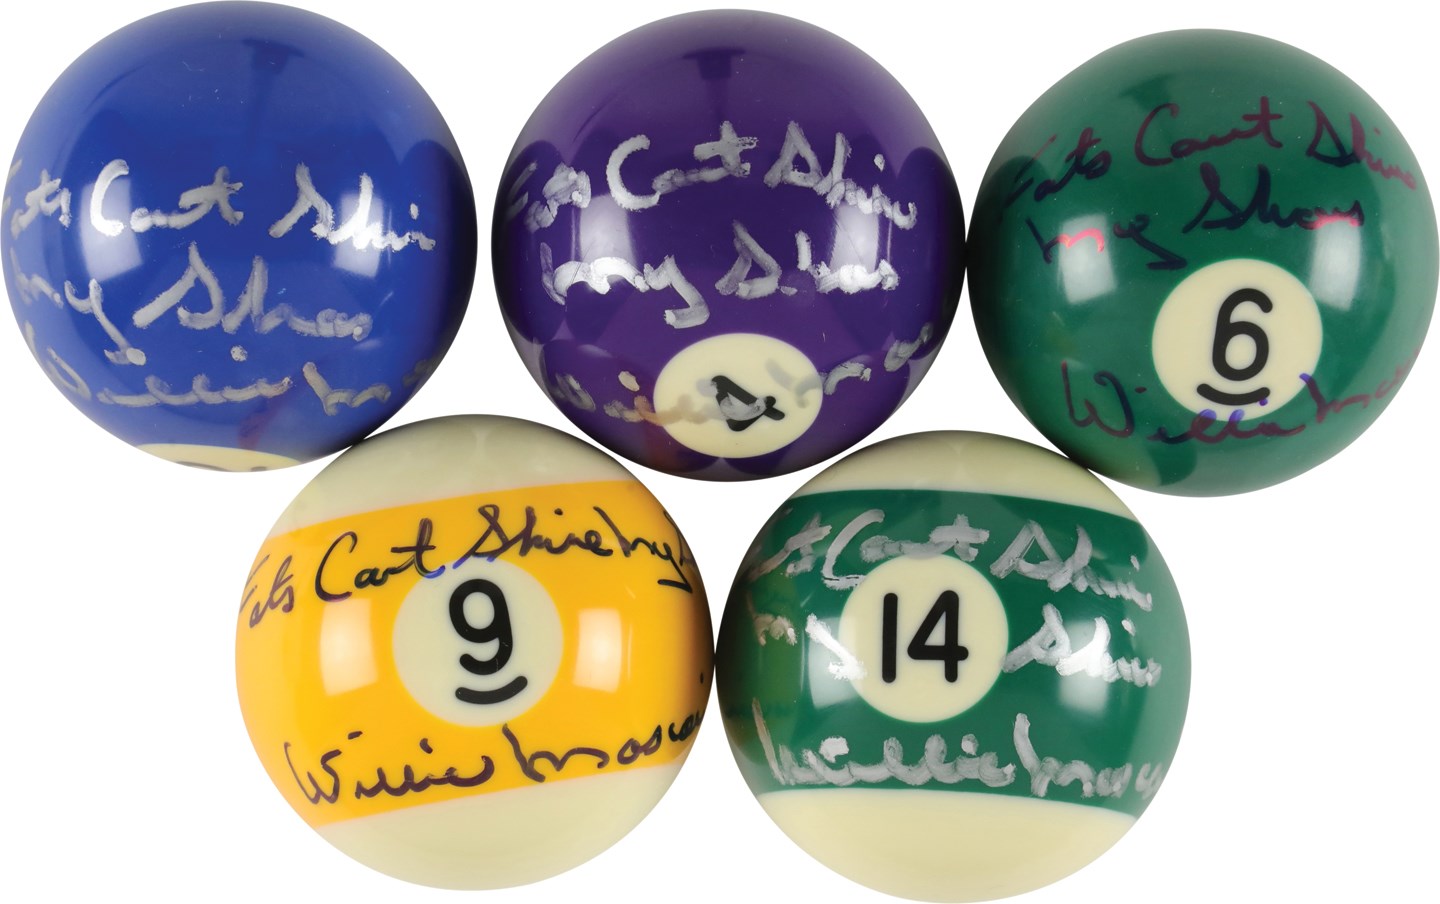 - Circa Late 1970s Willie Mosconi Signed Pool Balls Inscribed "Fats Can't Sign My Shoes" Collection (5) All PSA